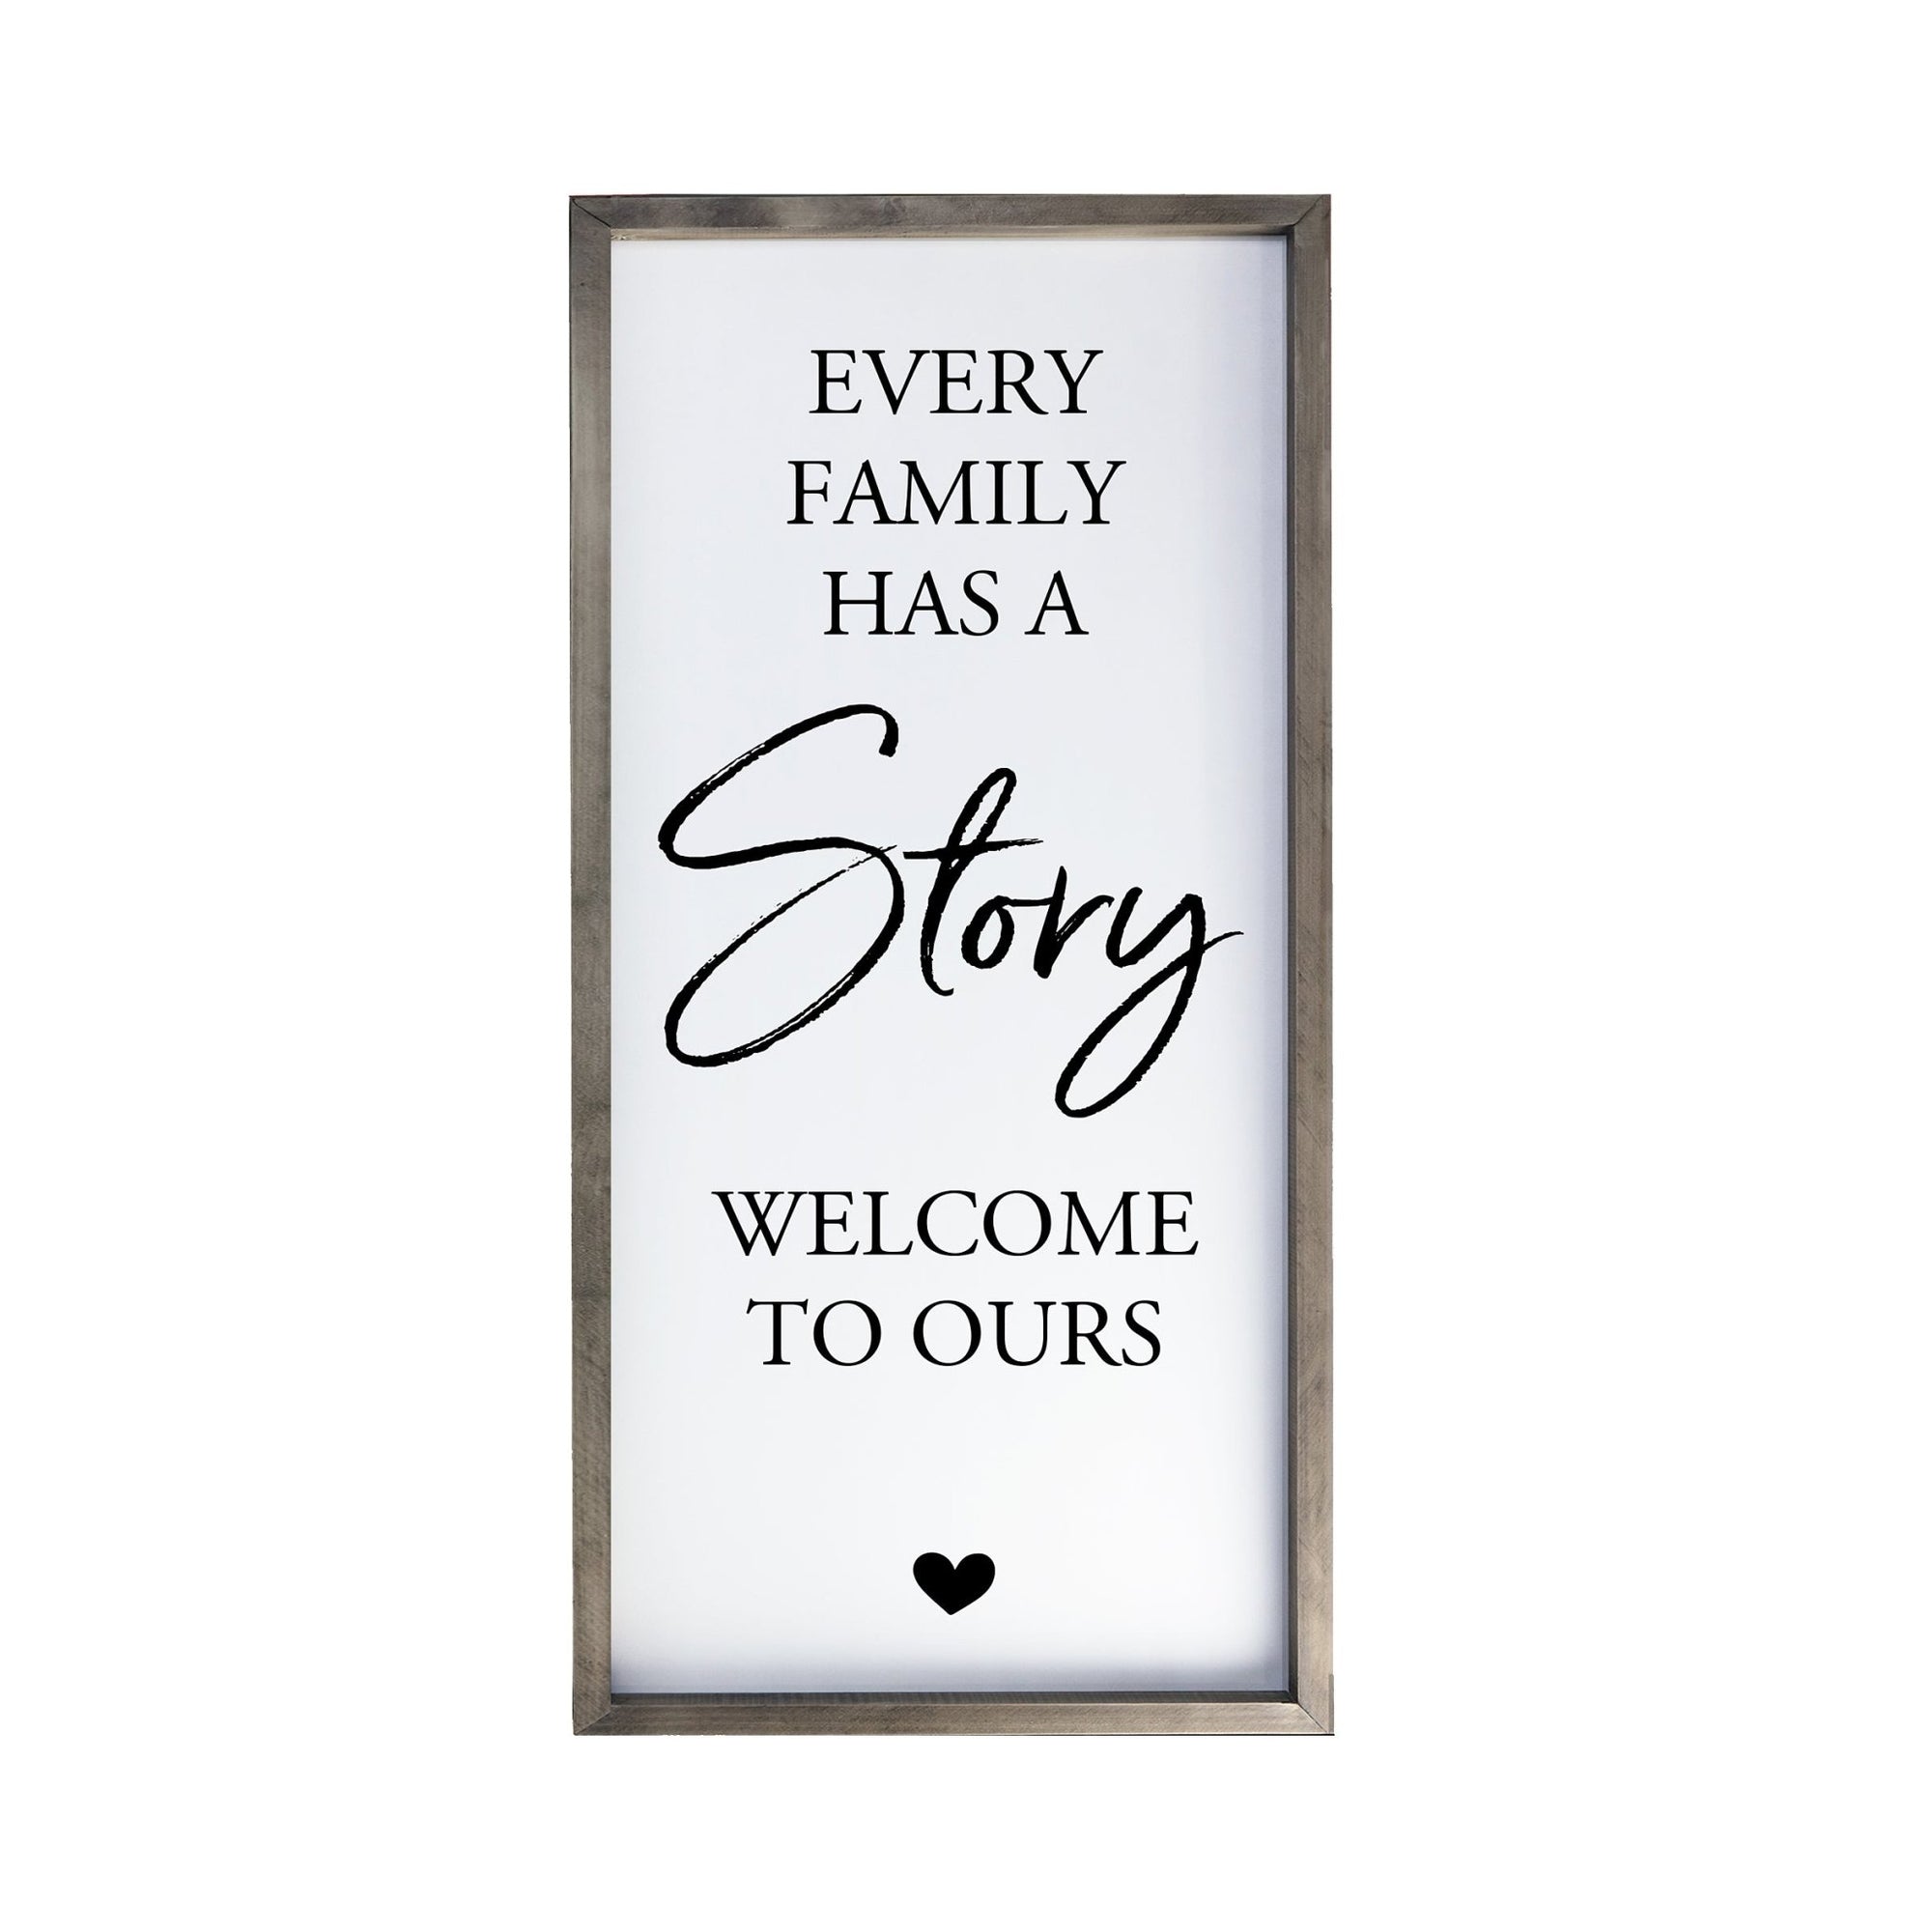 Large Family Wall Decor Quote Sign For Home 18 x 36 - Every Family Has A Story - LifeSong Milestones